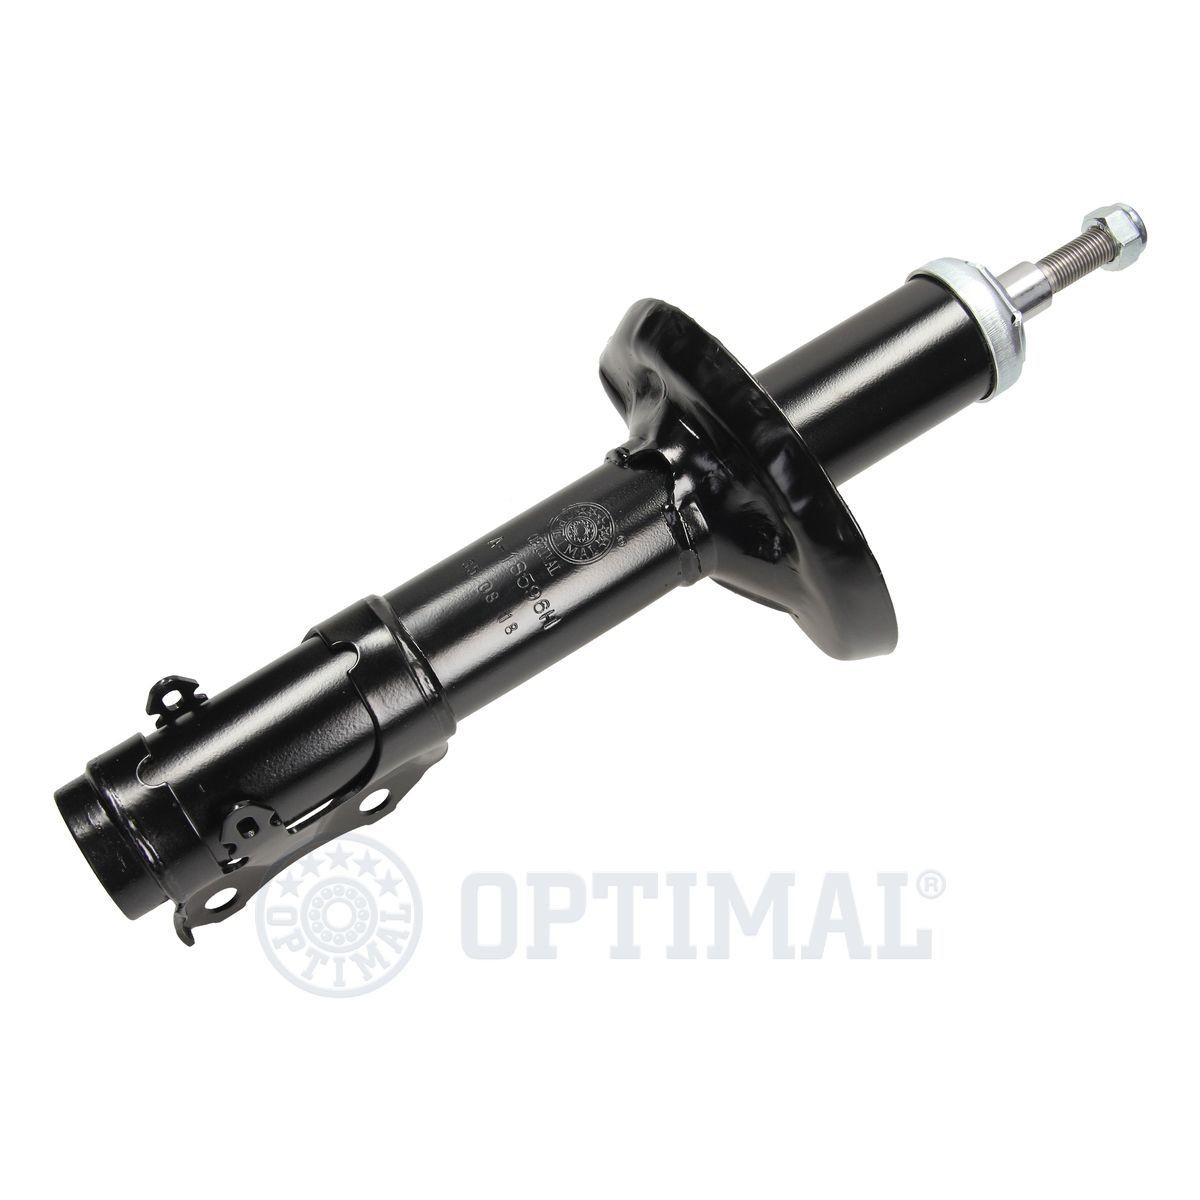 OPTIMAL Front Axle, Oil Pressure, Twin-Tube, Suspension Strut, Top pin, Bottom Pin, M14x1,5 Shocks A-18596H buy